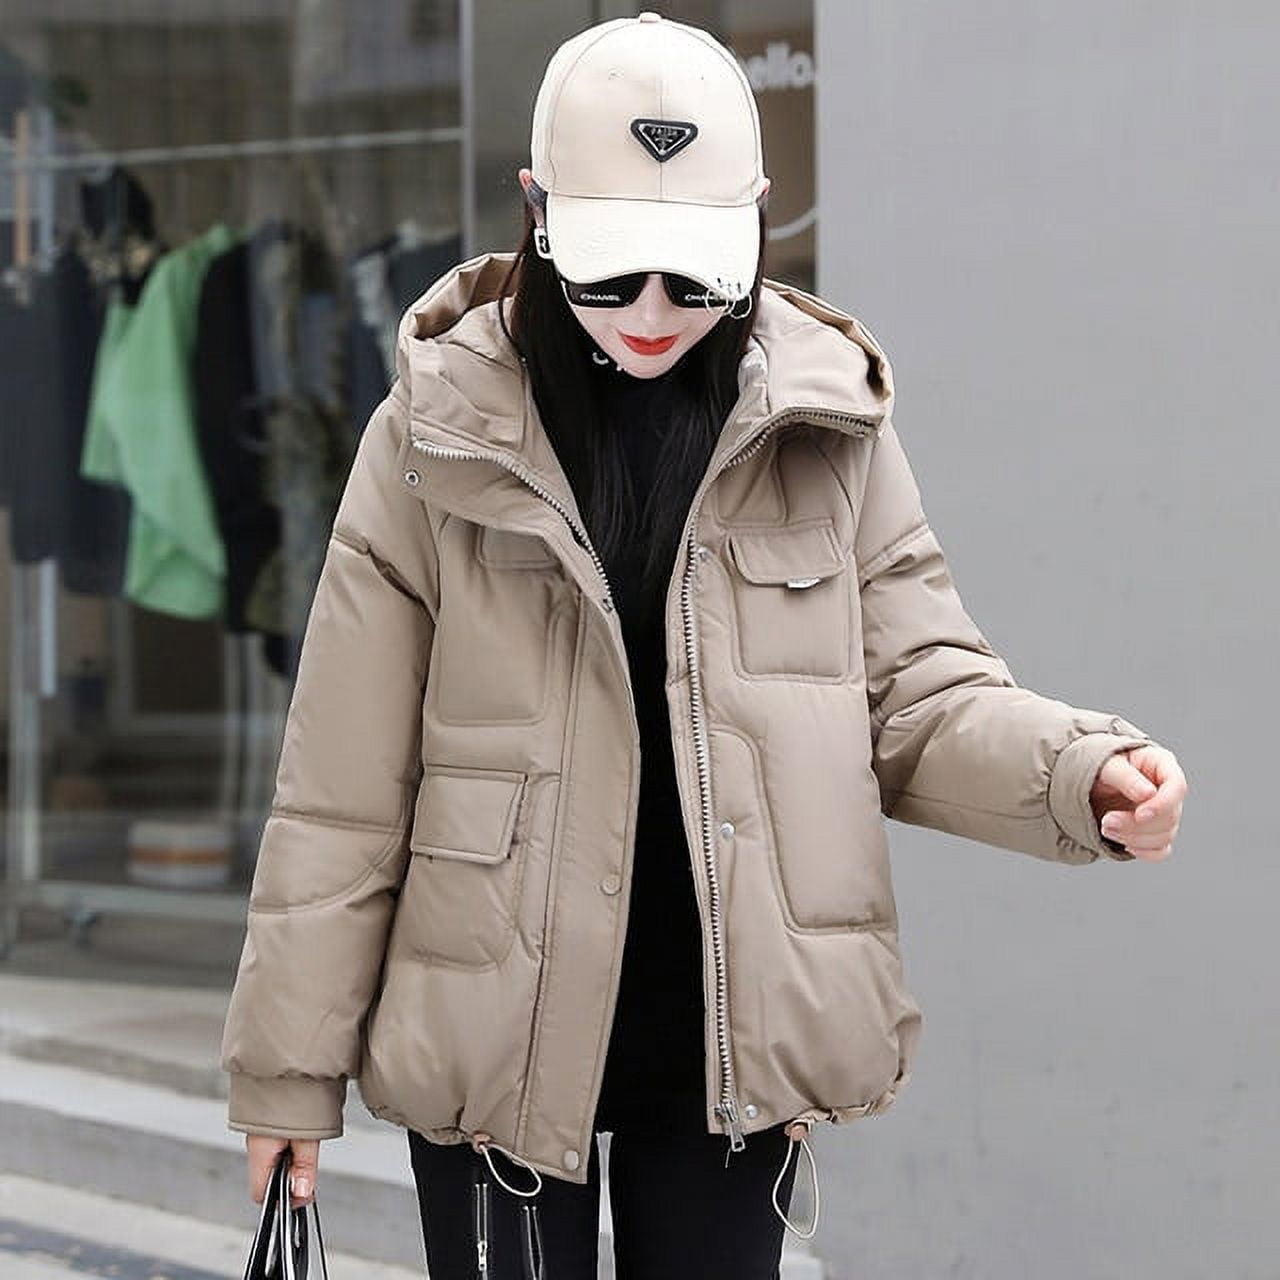 2018 Womens Winter Jacket With Big Fur Collar Casual Hooded Outwear, Slim  Fit Parka Extra Long Puffer Coat For Winter From Viviant, $43.3 | DHgate.Com